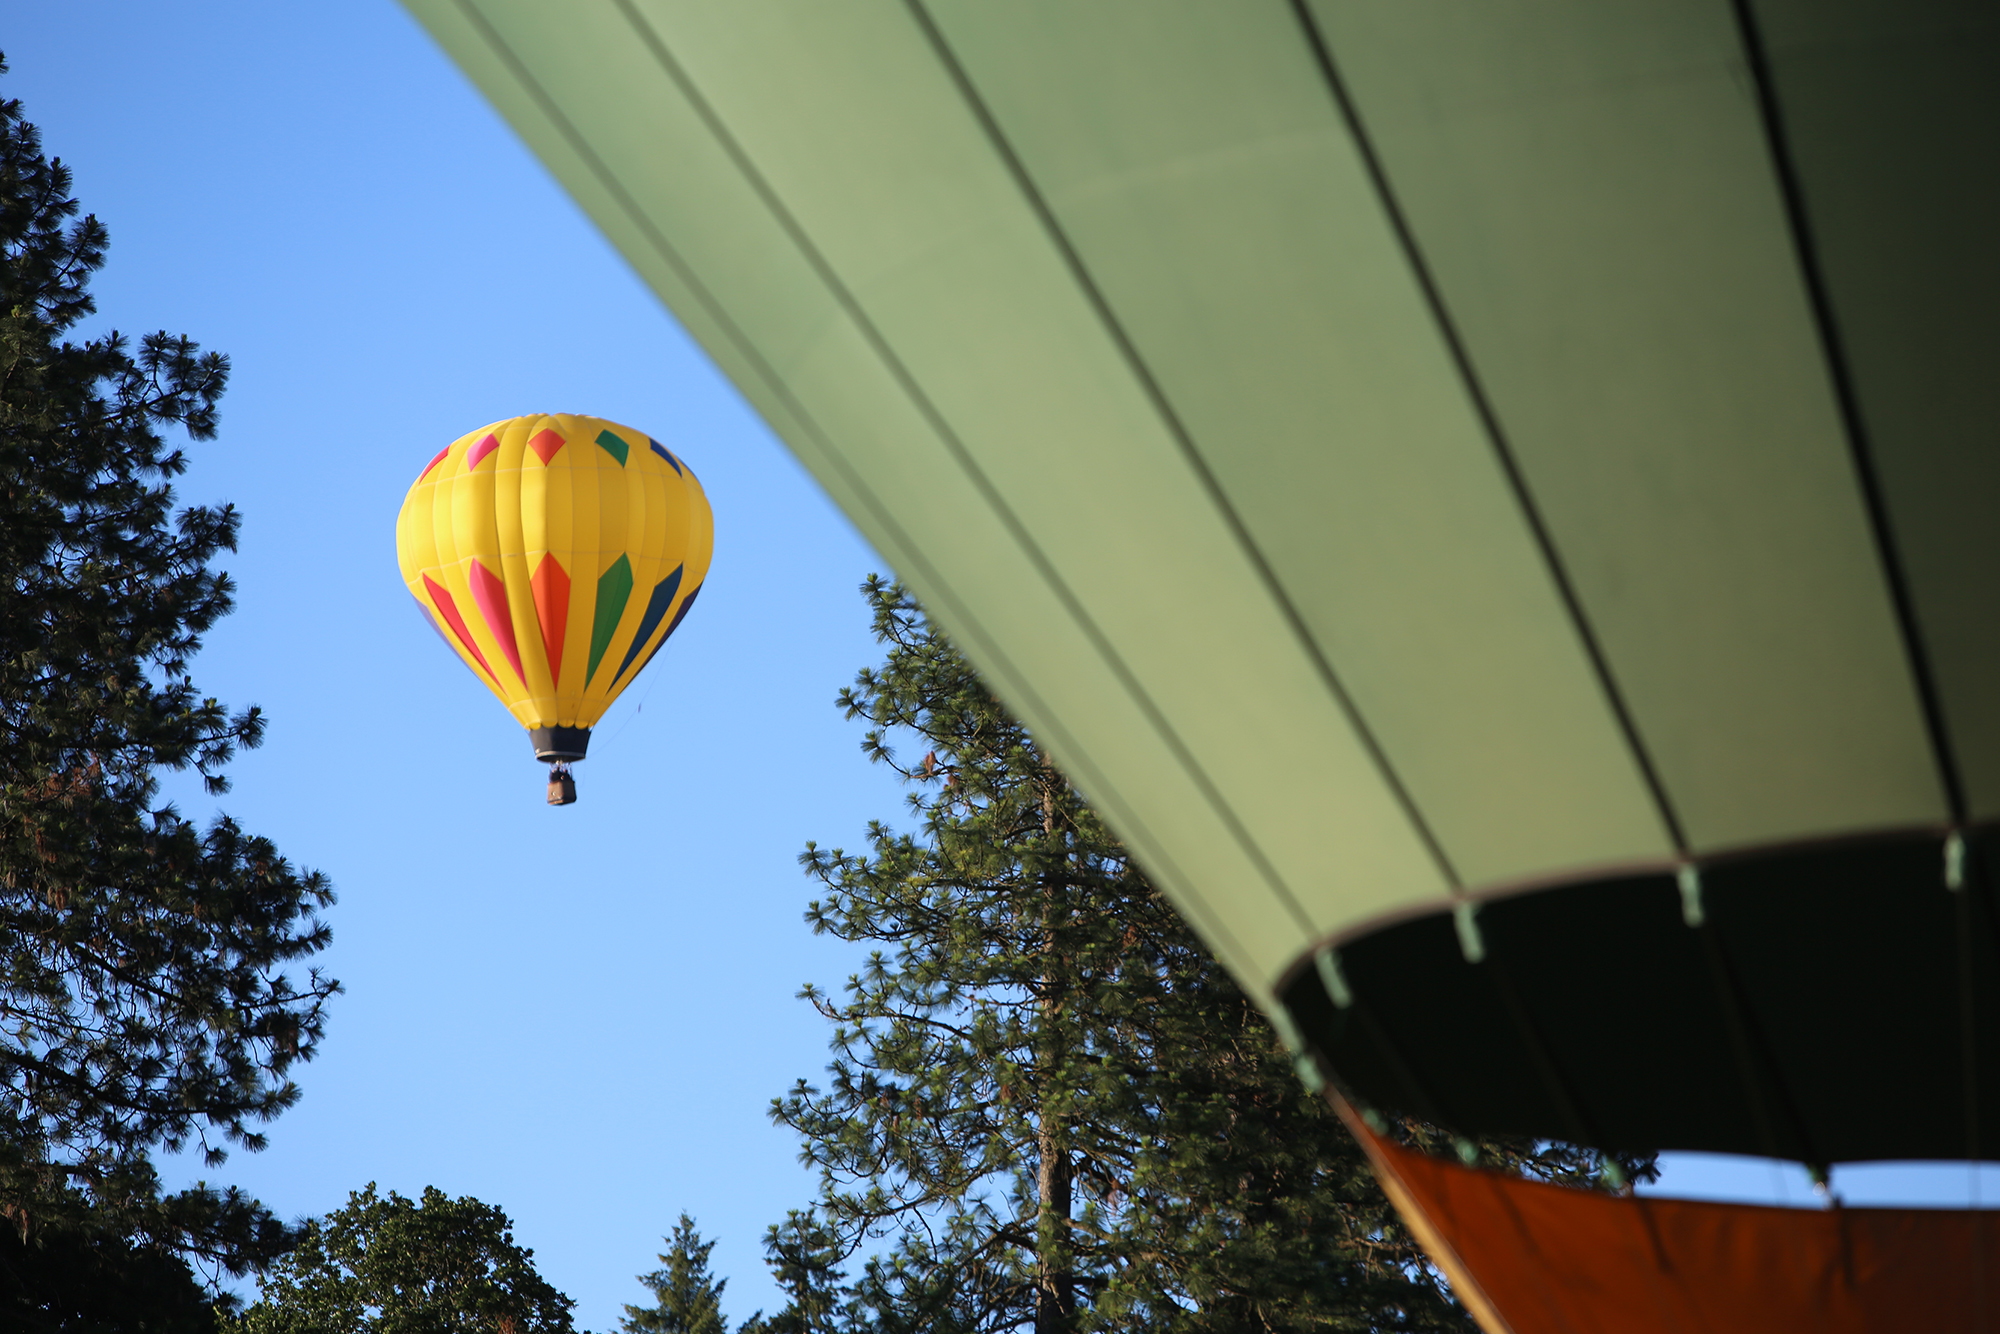 Tigard Festival of Balloons, Salem World Beat, and Comedy in the